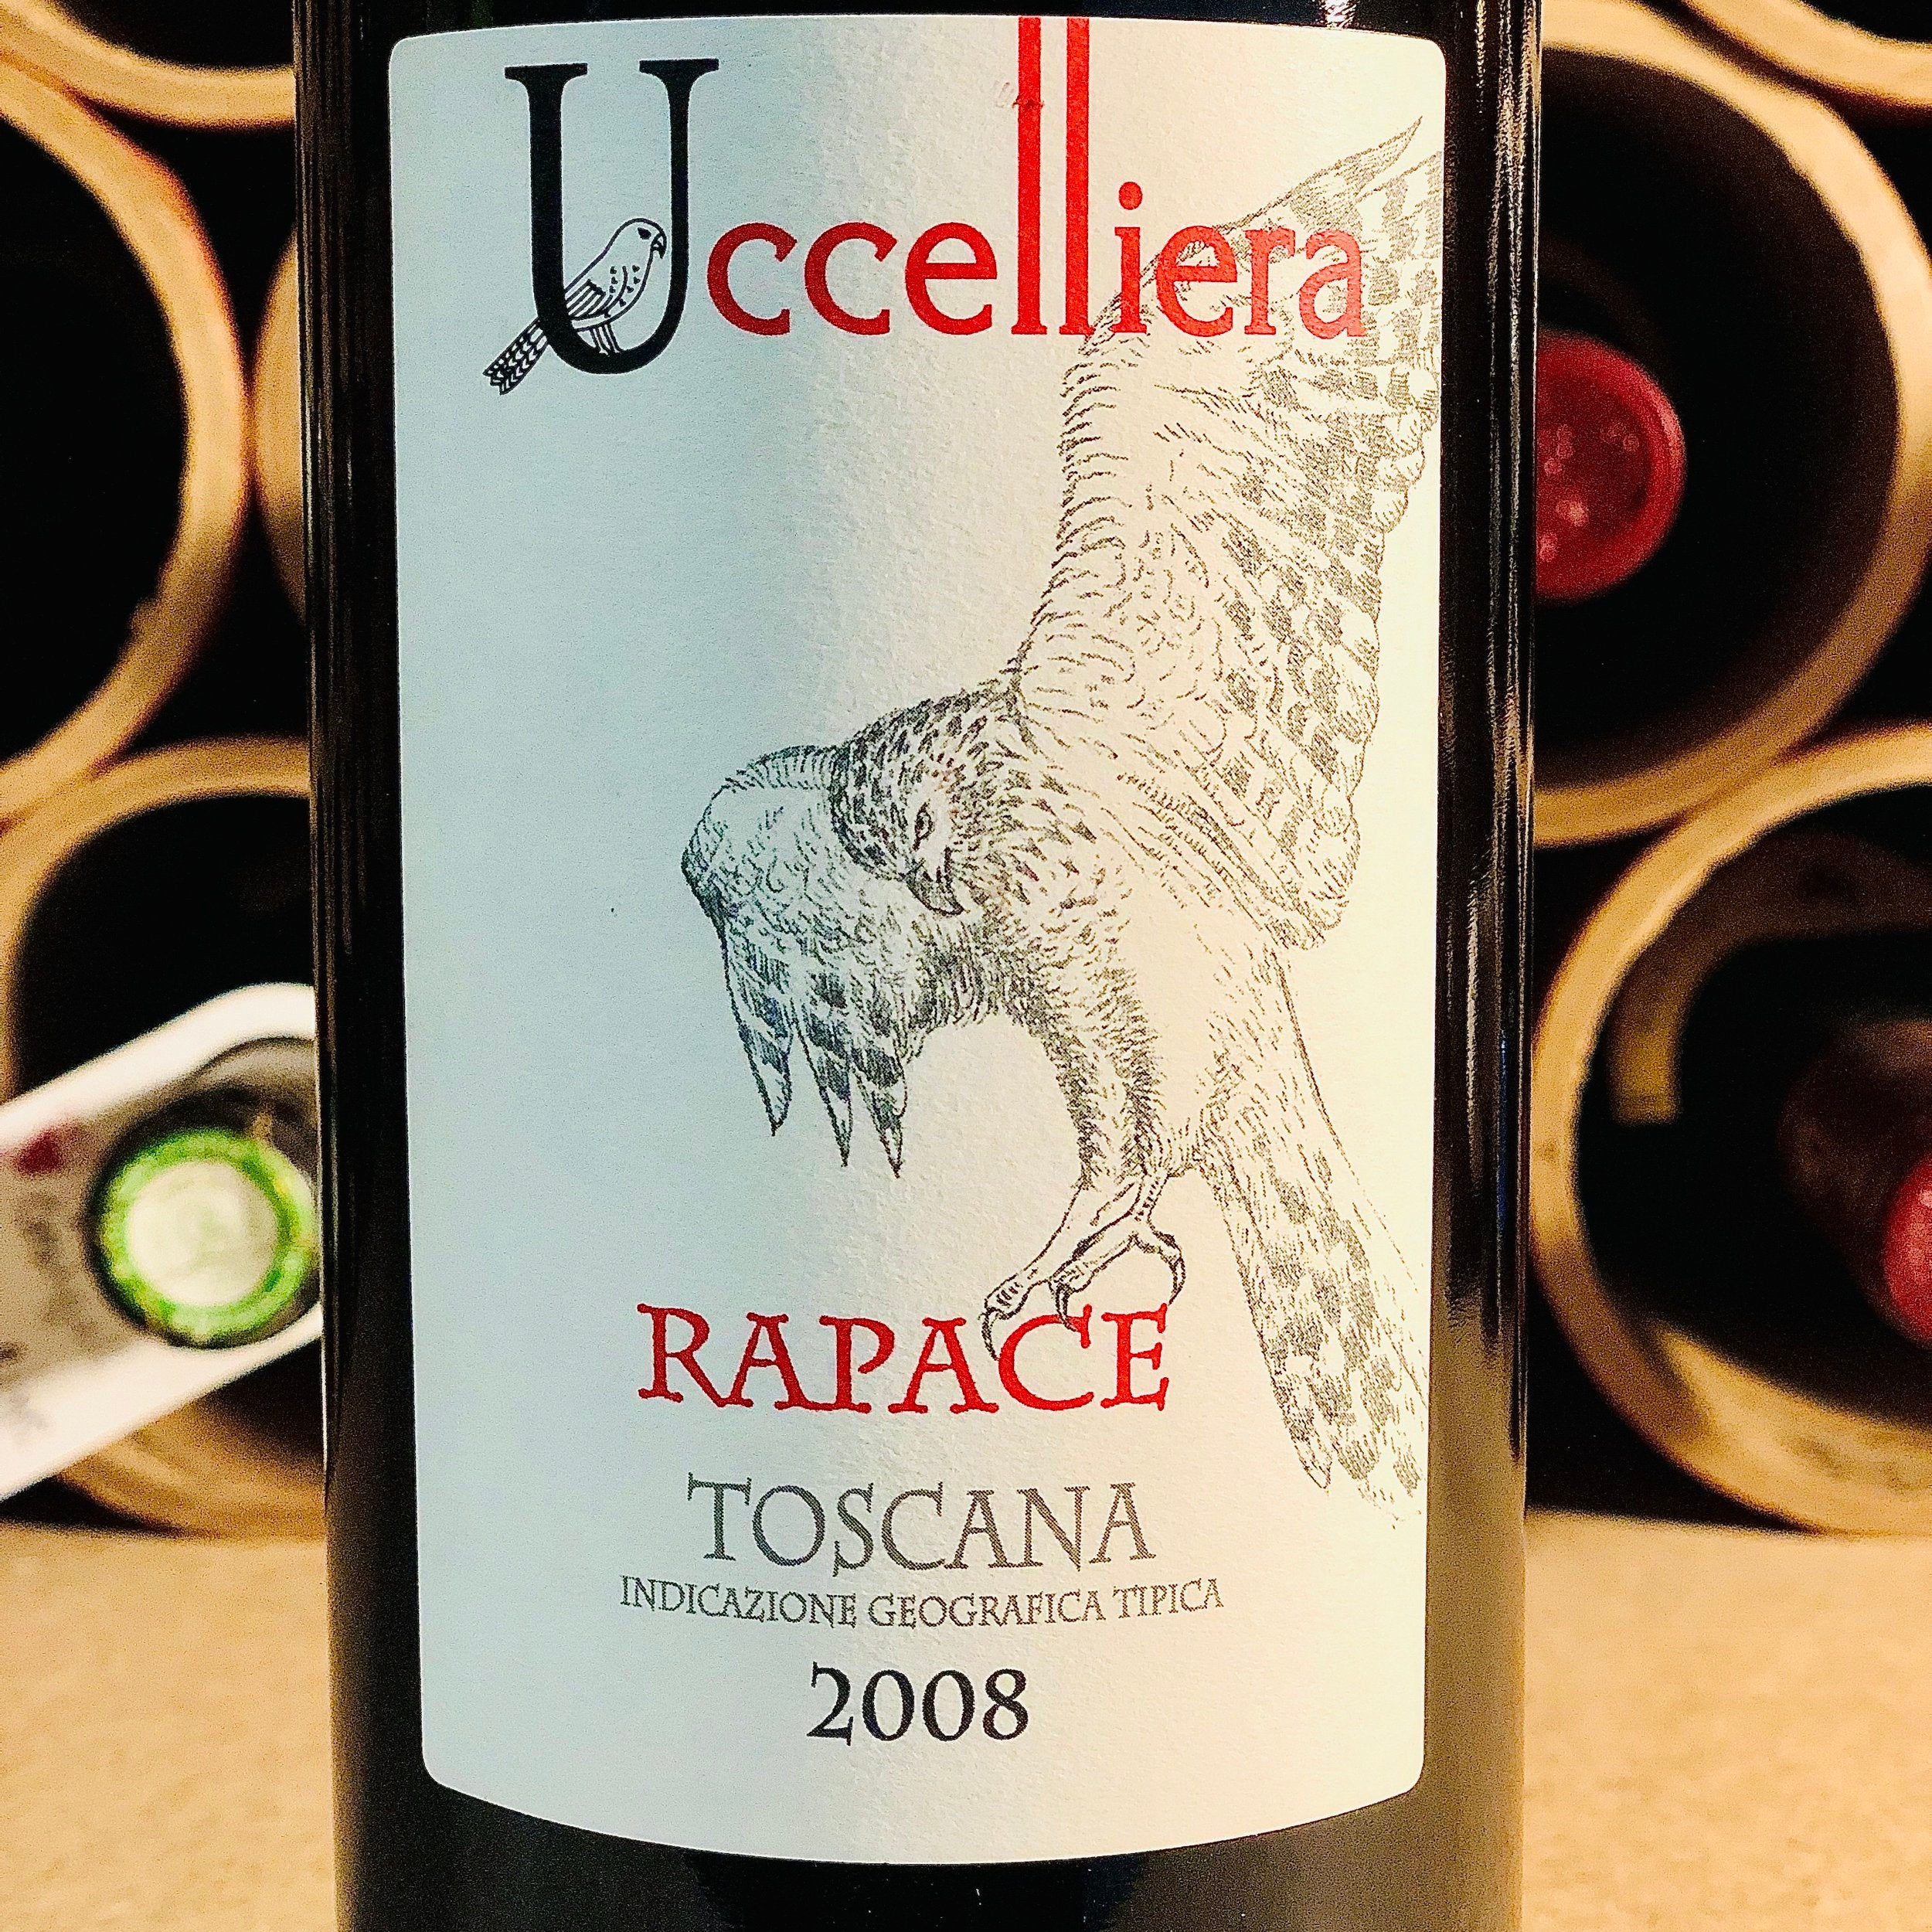 Uccelliera, Rapace, Toscana IGT 2008